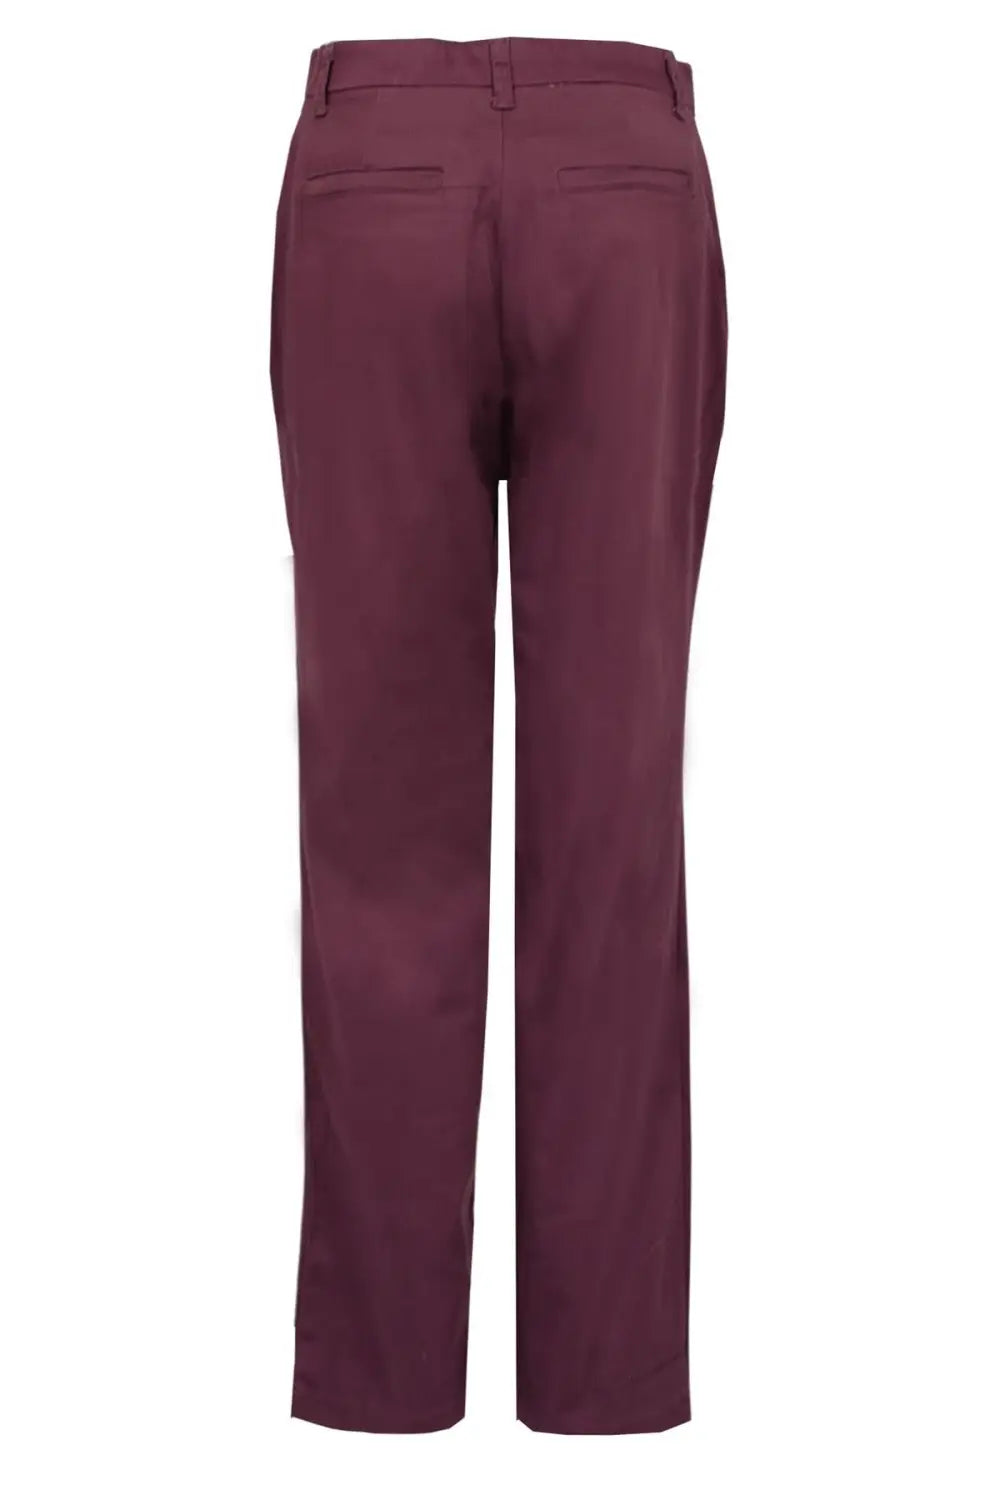 Lee Comfort Stretch Chino Trousers